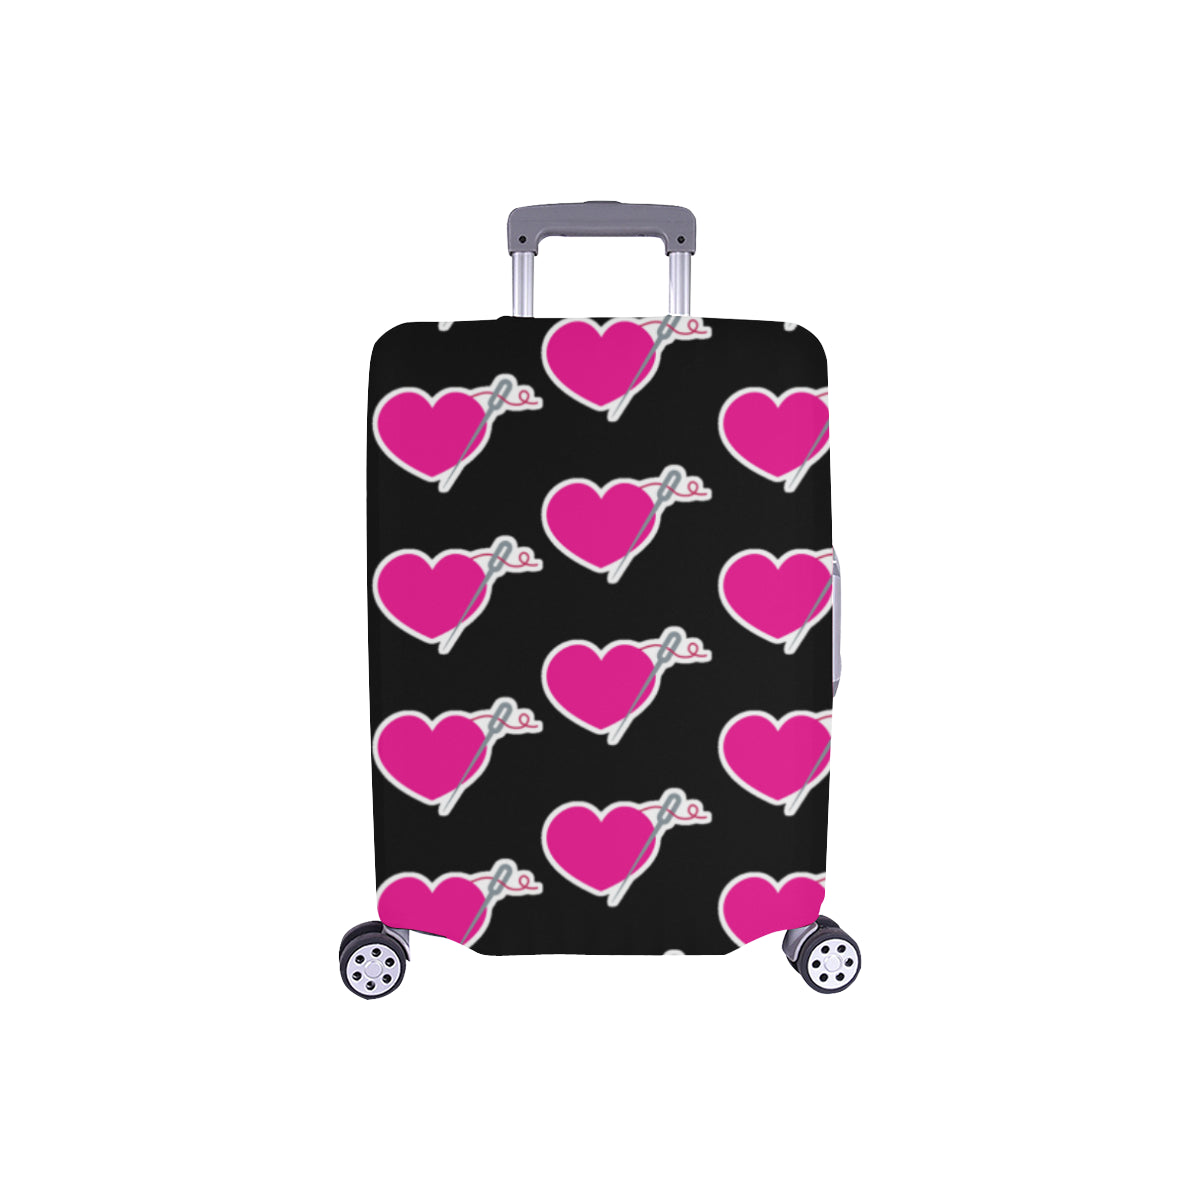 HEART AND NEEDLE LUGGAGE COVER - SMALL